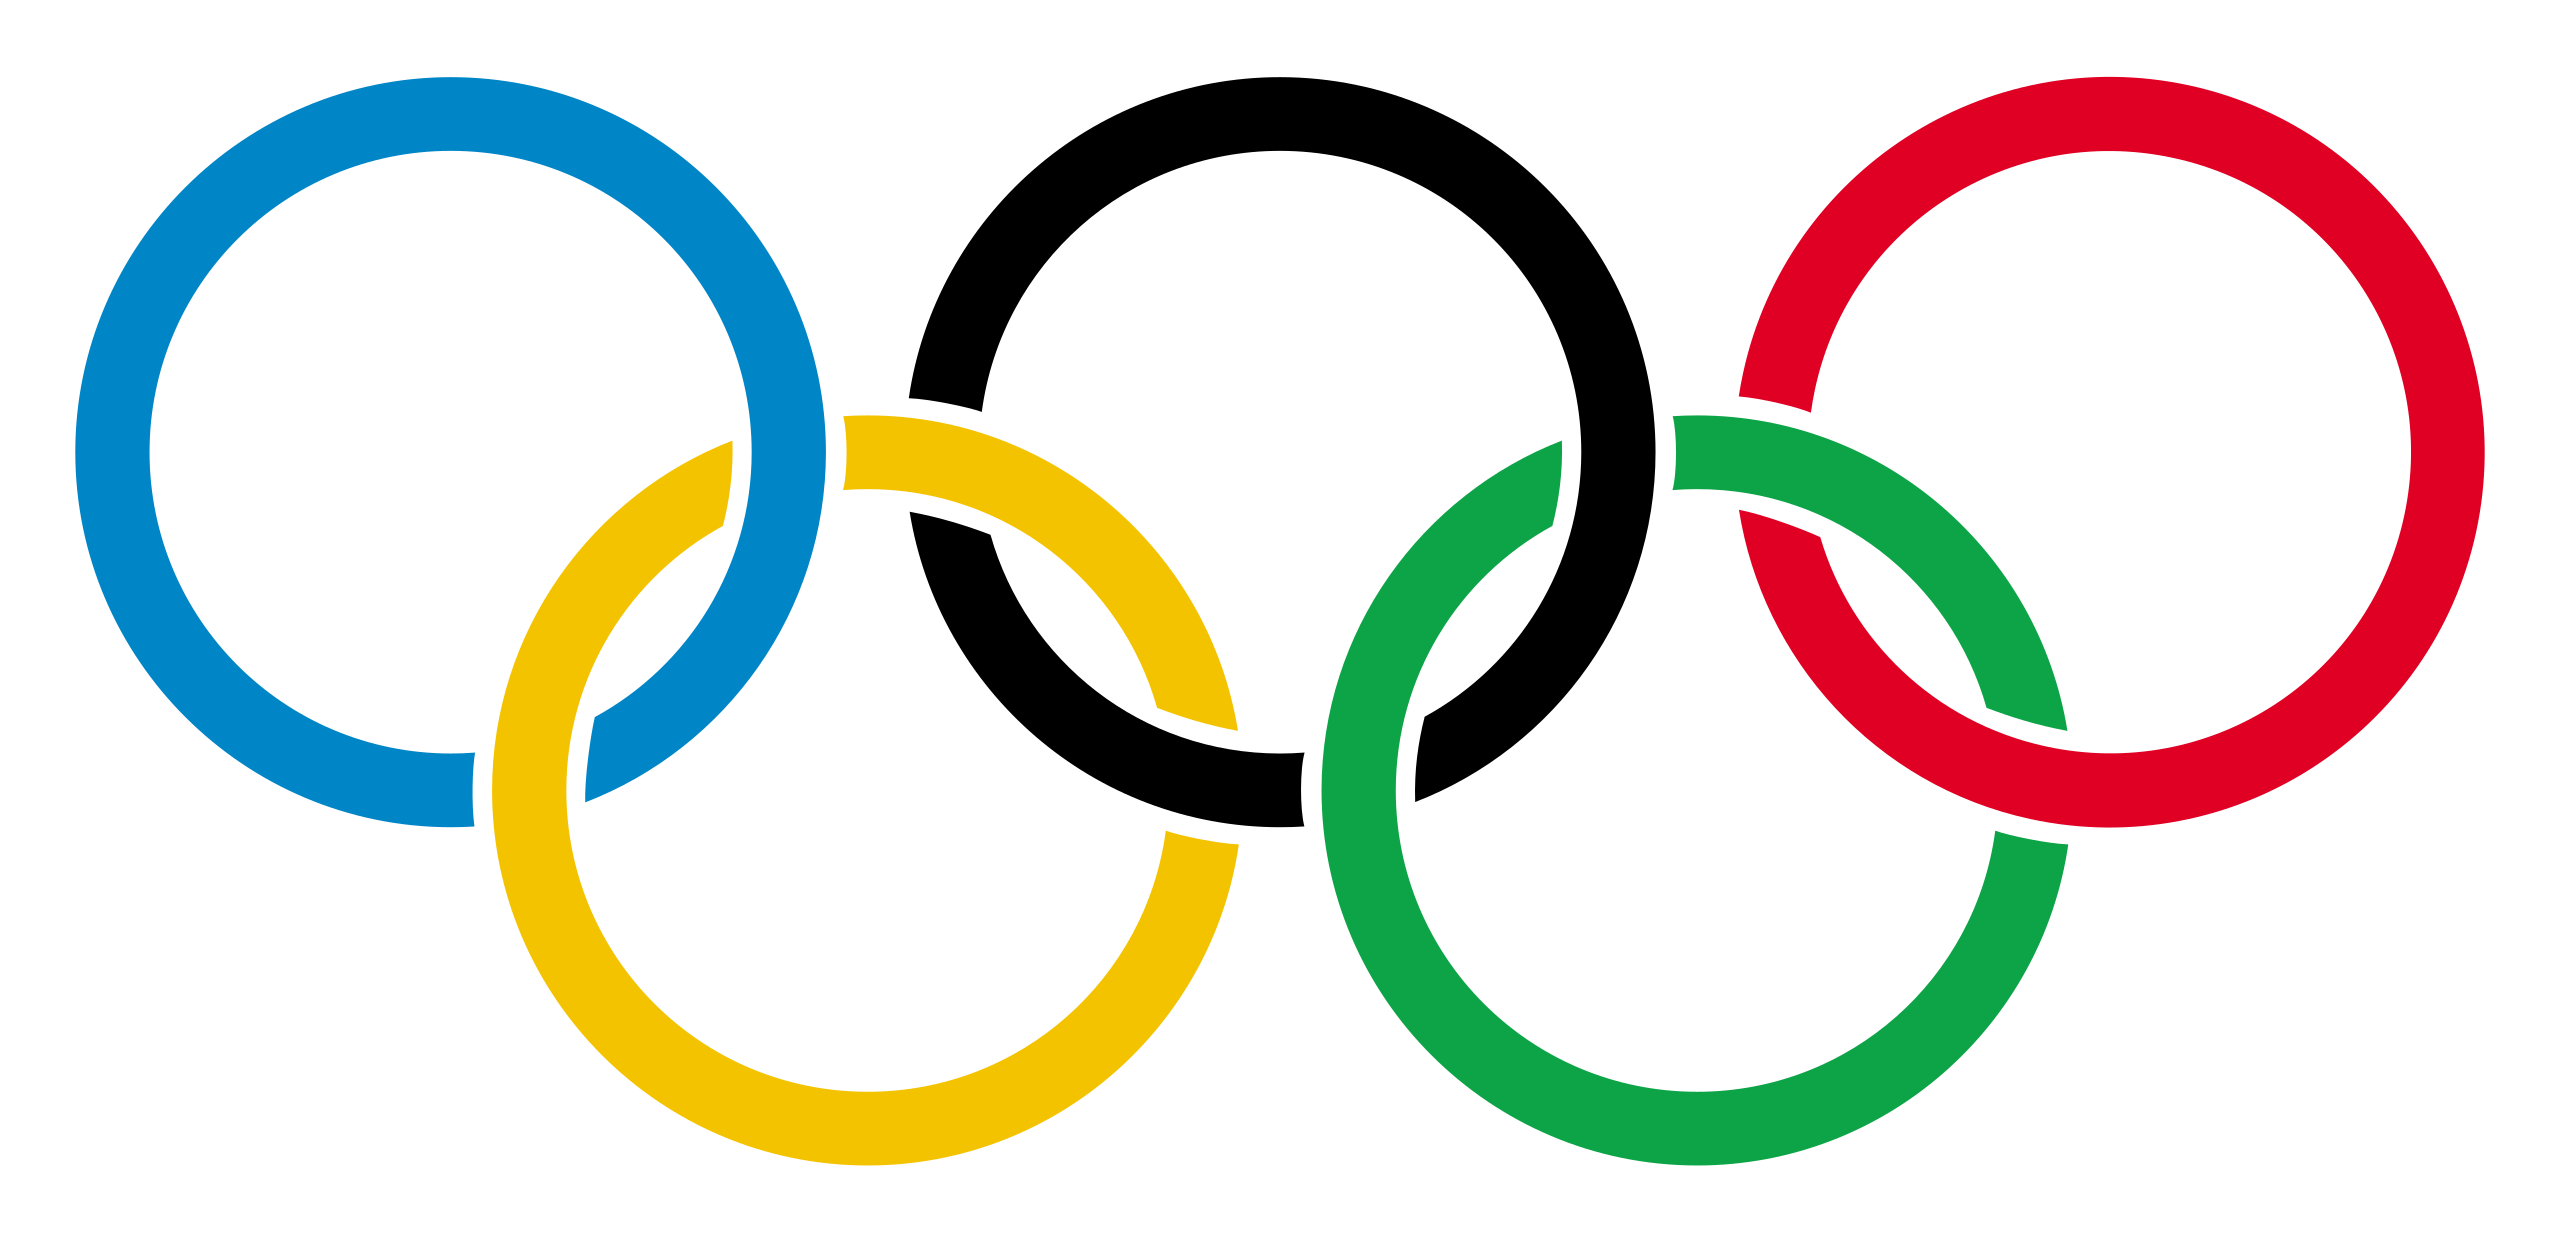 Share some fun and interesting facts on the Olympics with your kids!  Opening ceremony is Friday, July 27th! | Fun facts for kids, Fun facts,  Facts for kids